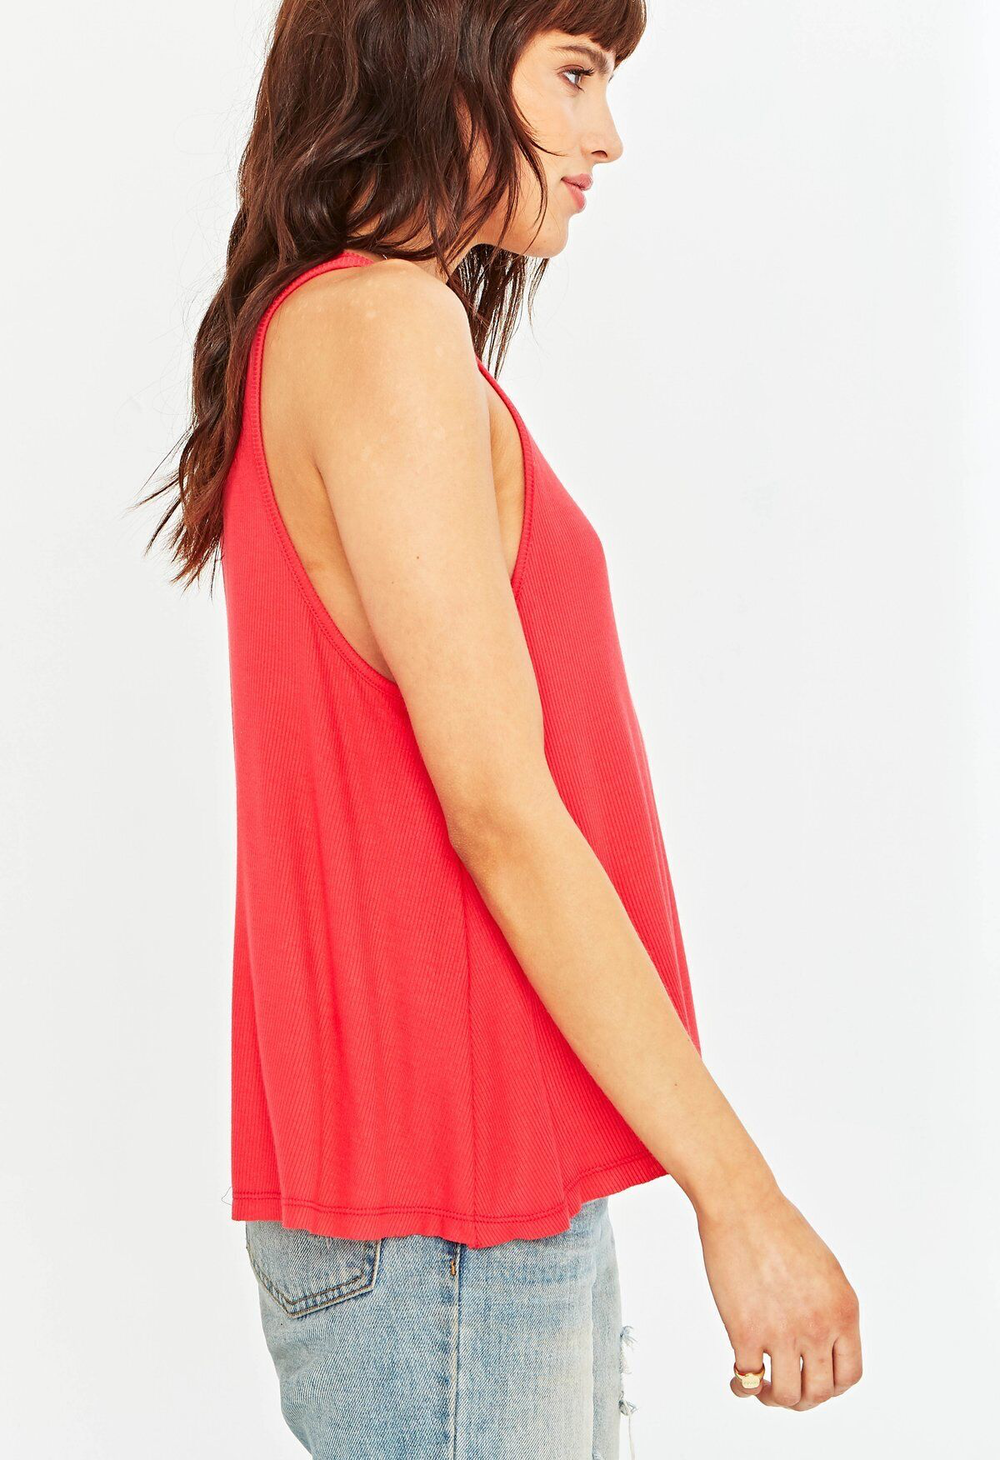 If You Ever Rib Tank - Coral - Kingfisher Road - Online Boutique